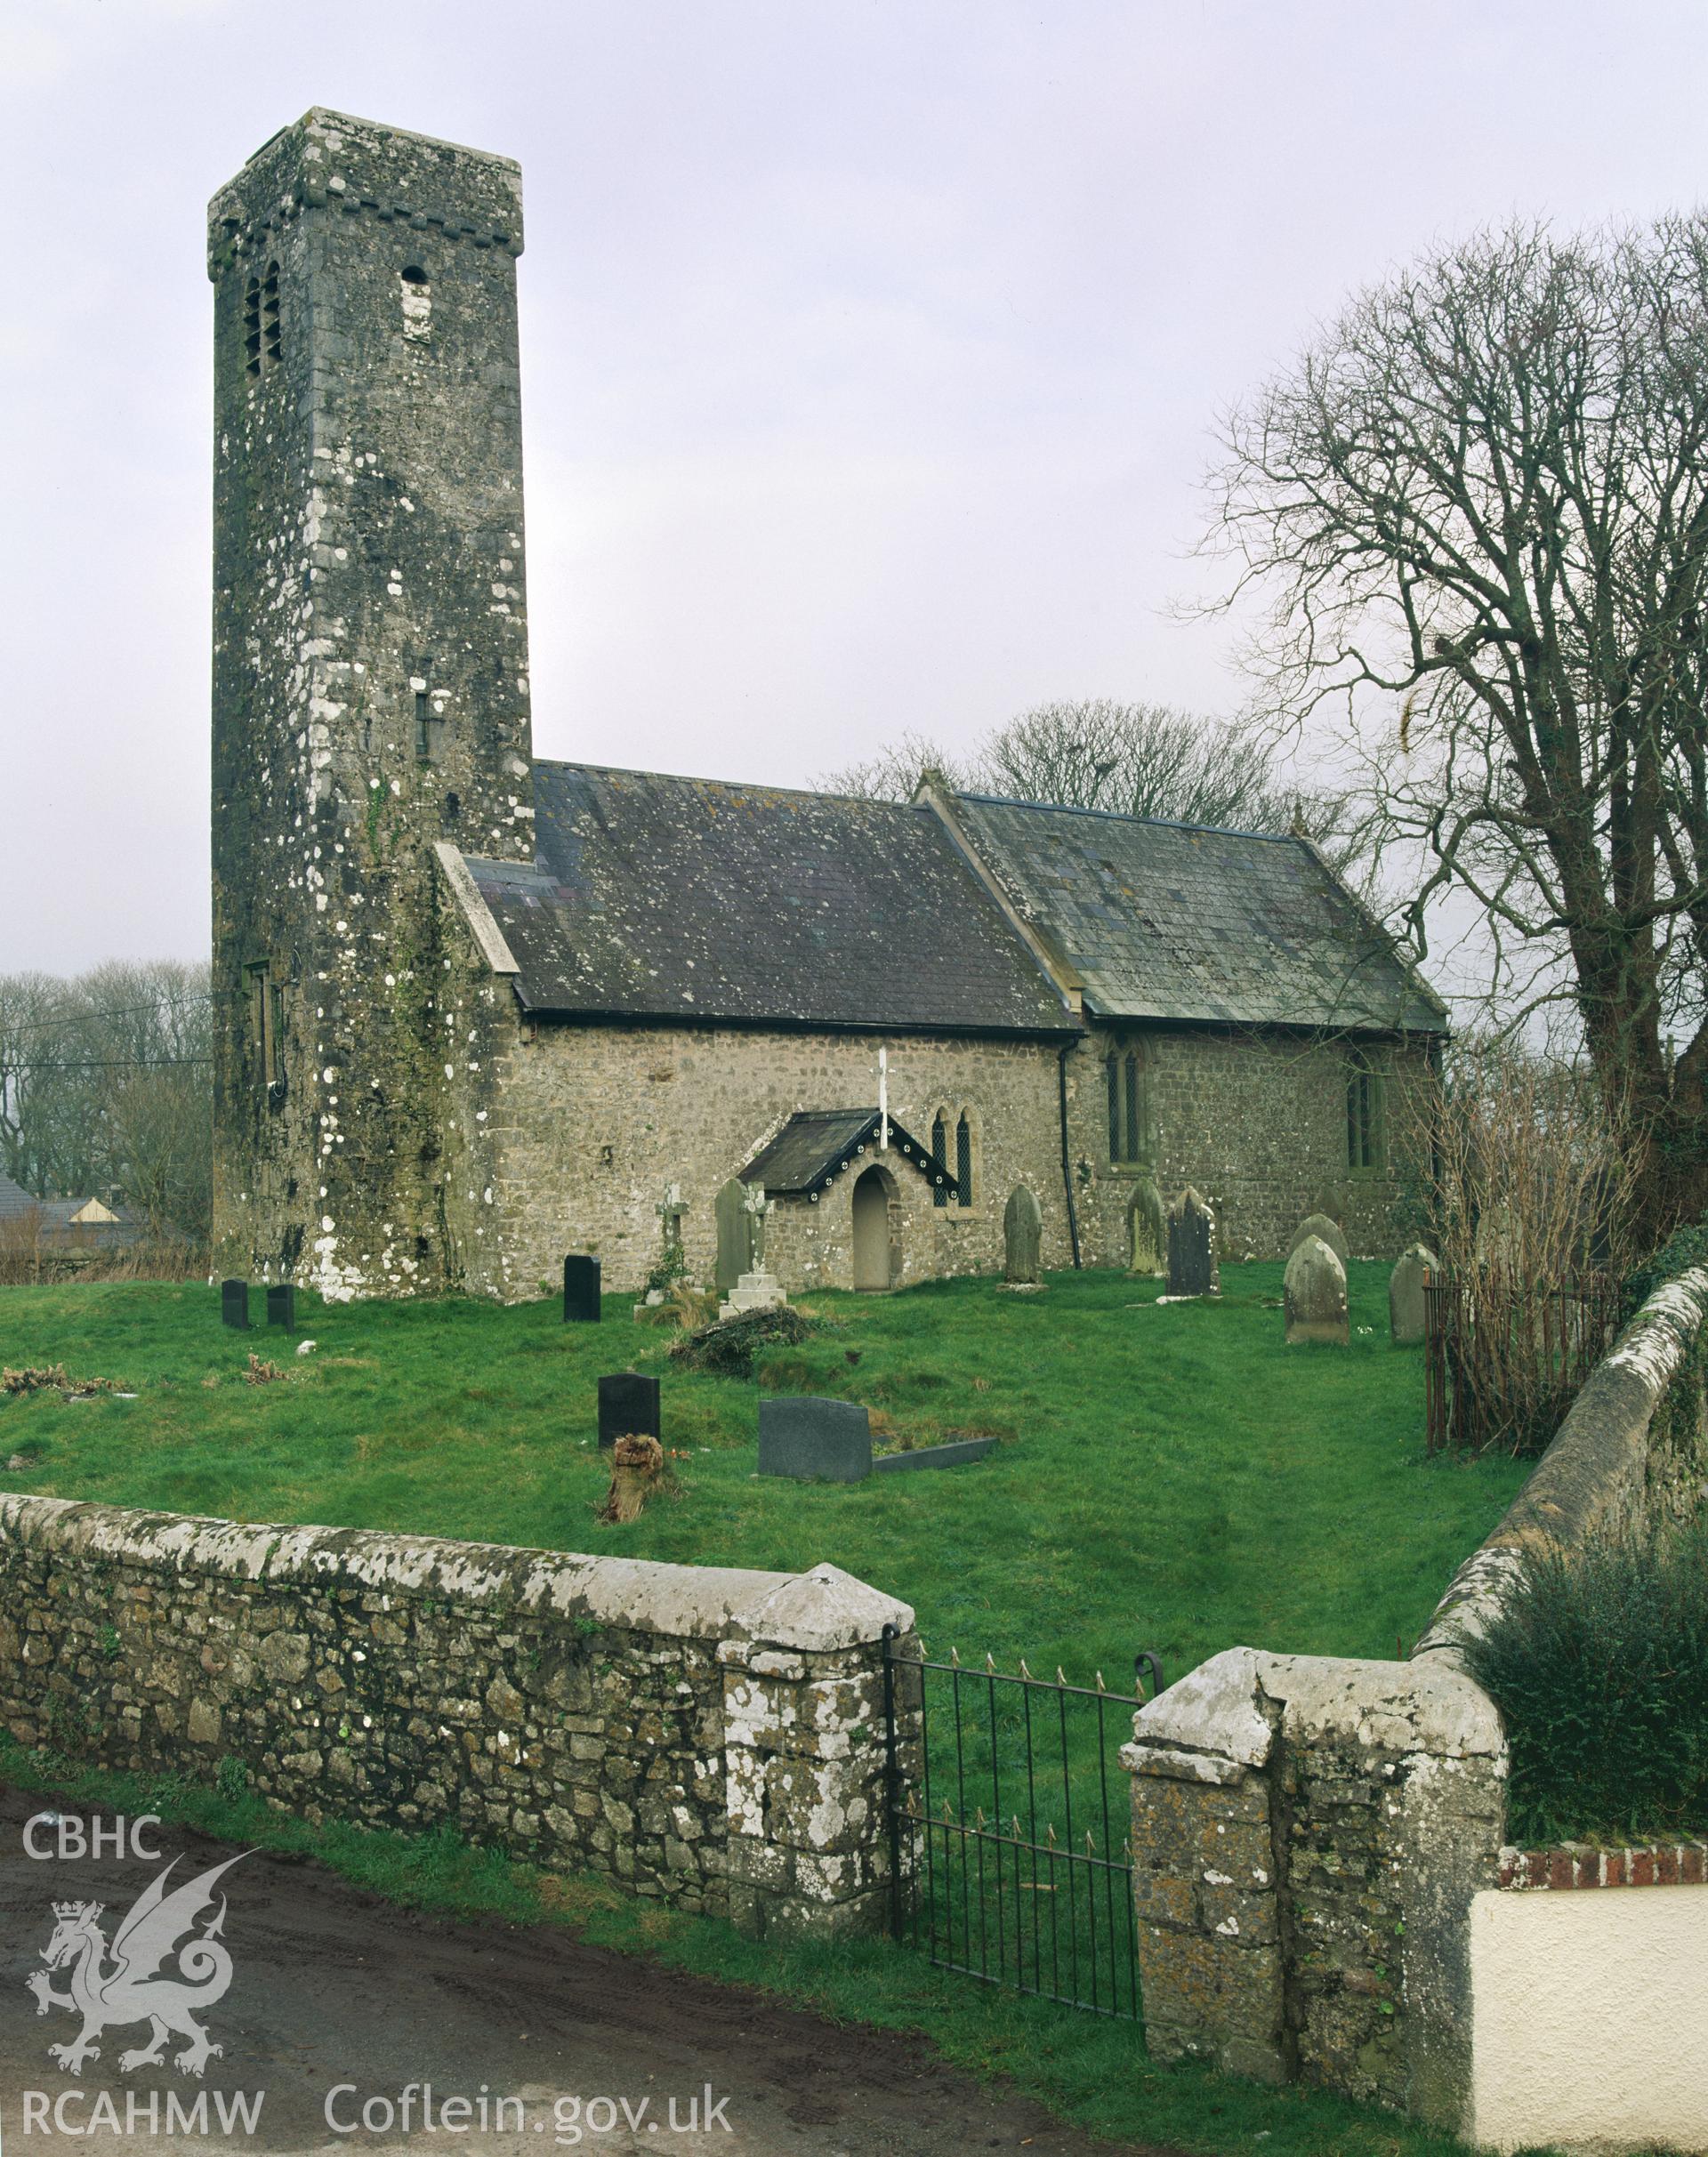 RCAHMW colour transparency showing Hodgeston Church, taken by Iain Wright, 2003.